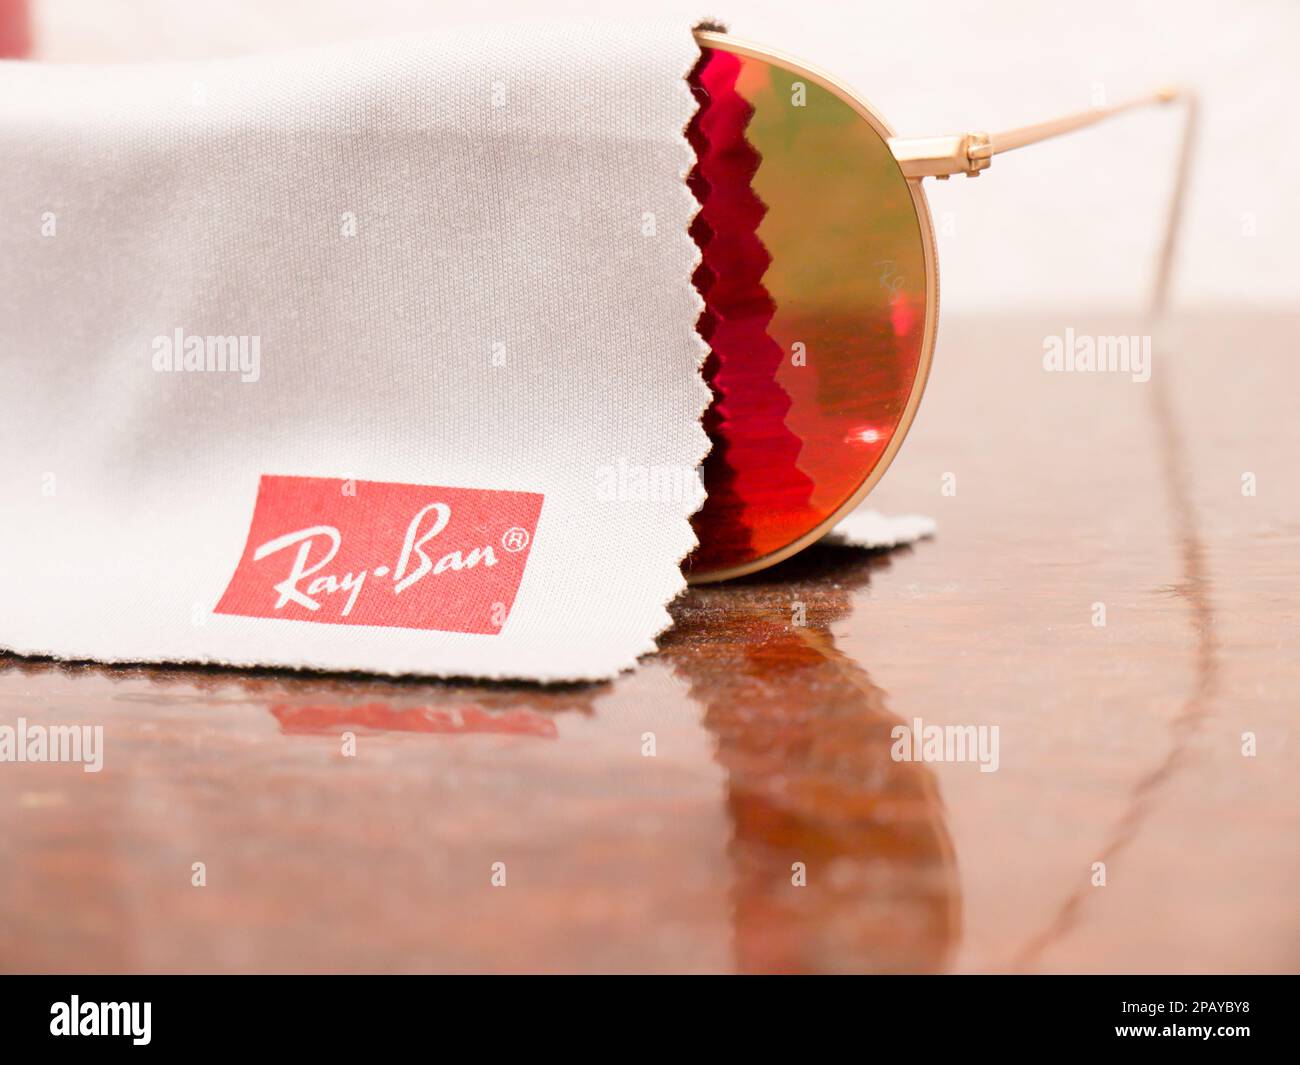 Ray-Ban RB 3447 sunglasses. Ray-Ban is a brand of sunglasses and eyeglasses  created in 1937 by the American company Bausch & Lomb Stock Photo - Alamy